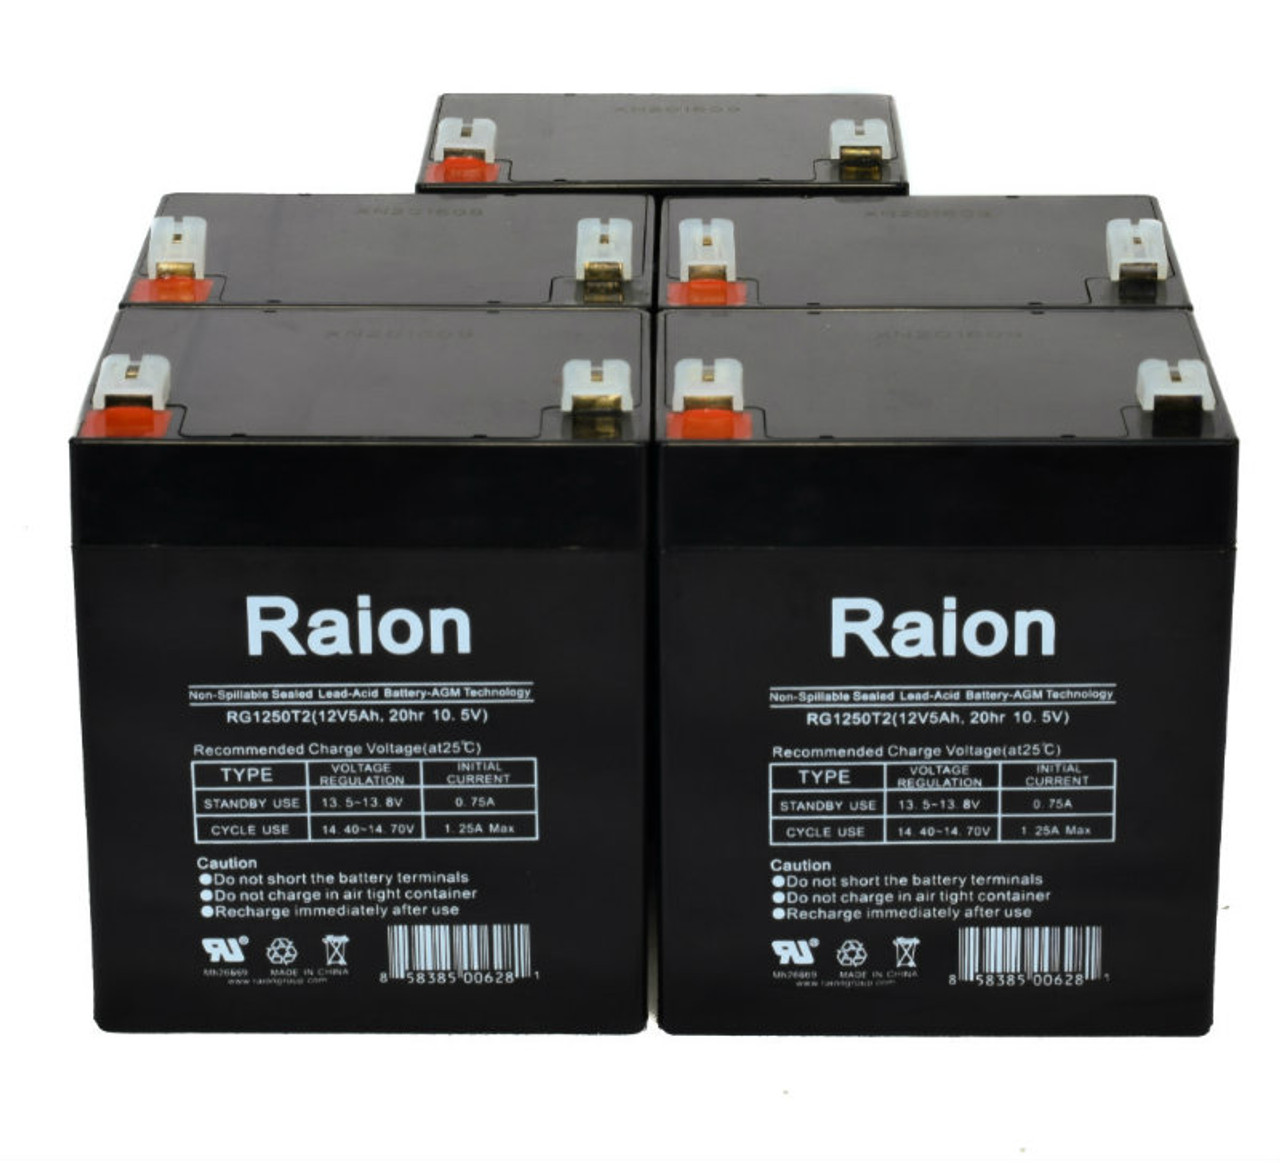 Raion Power RG1250T1 Replacement Fire Alarm Control Panel Battery for Napco Alarms MA1000E4LB PAK - 8 Pack